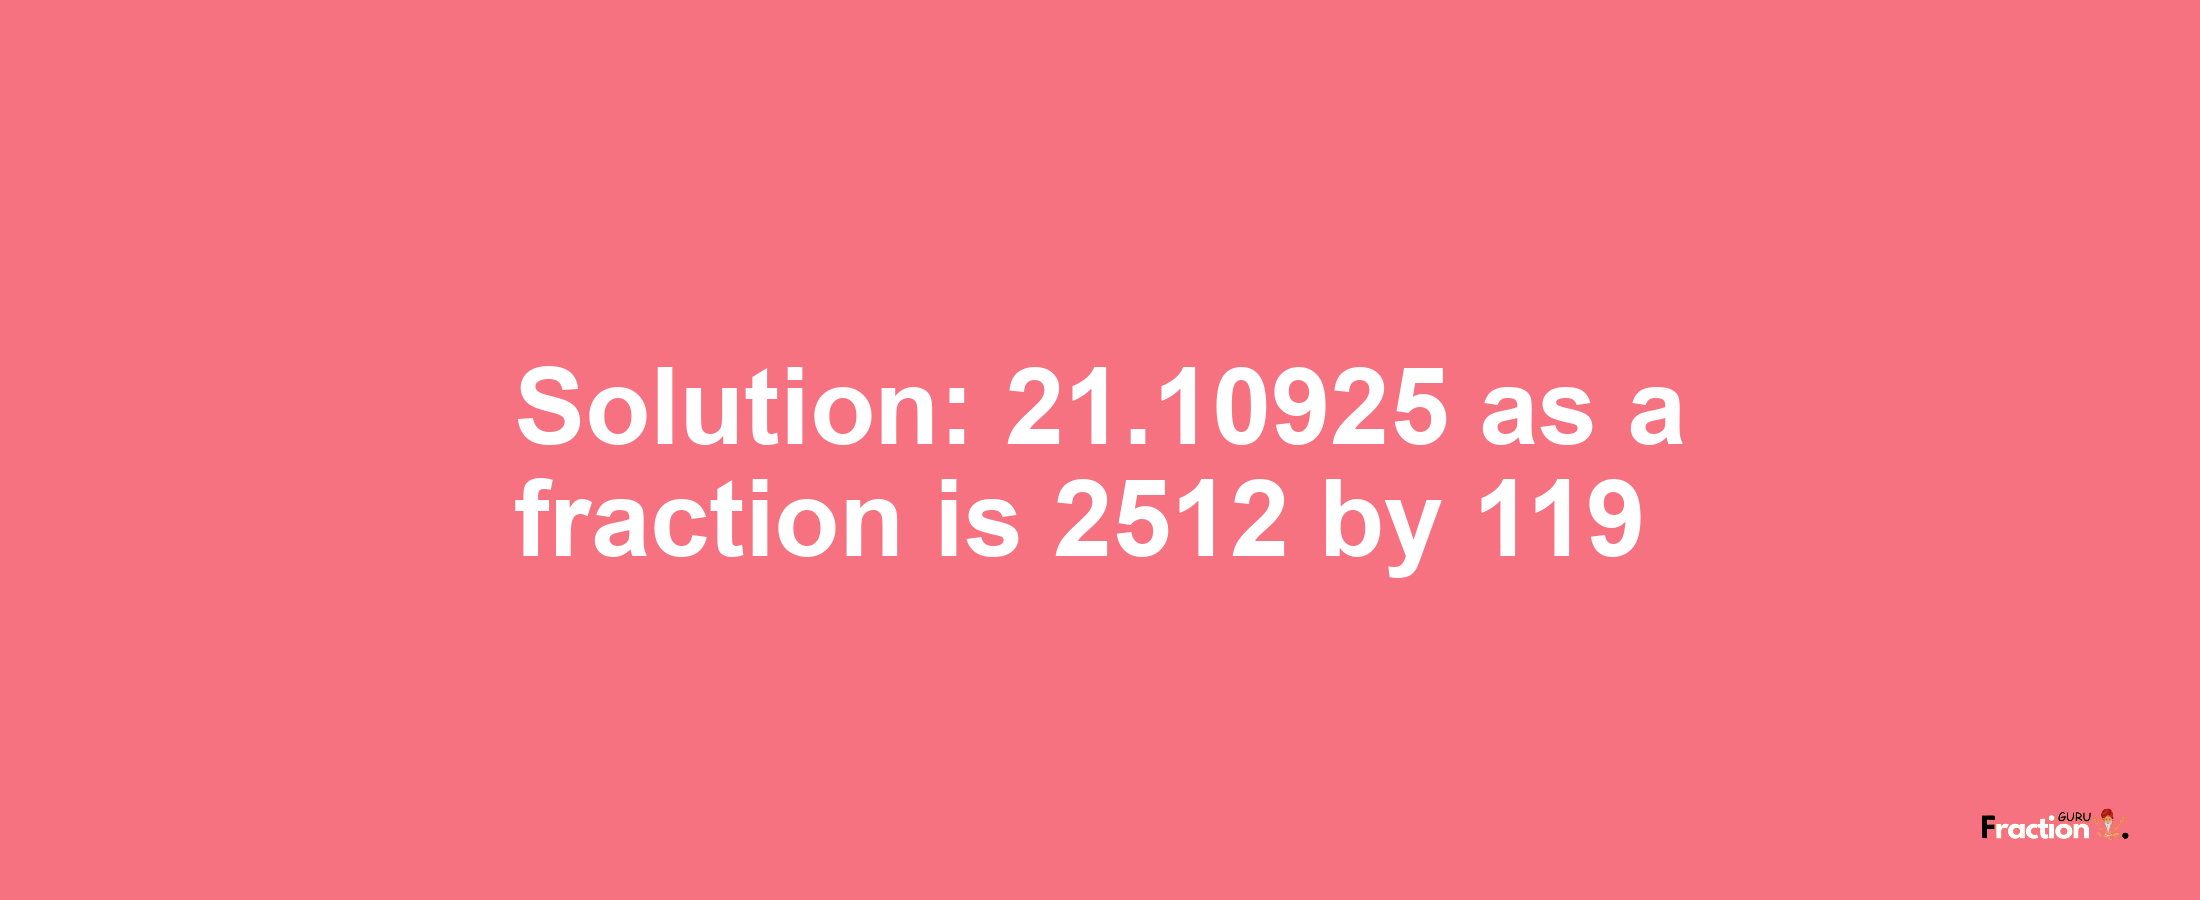 Solution:21.10925 as a fraction is 2512/119